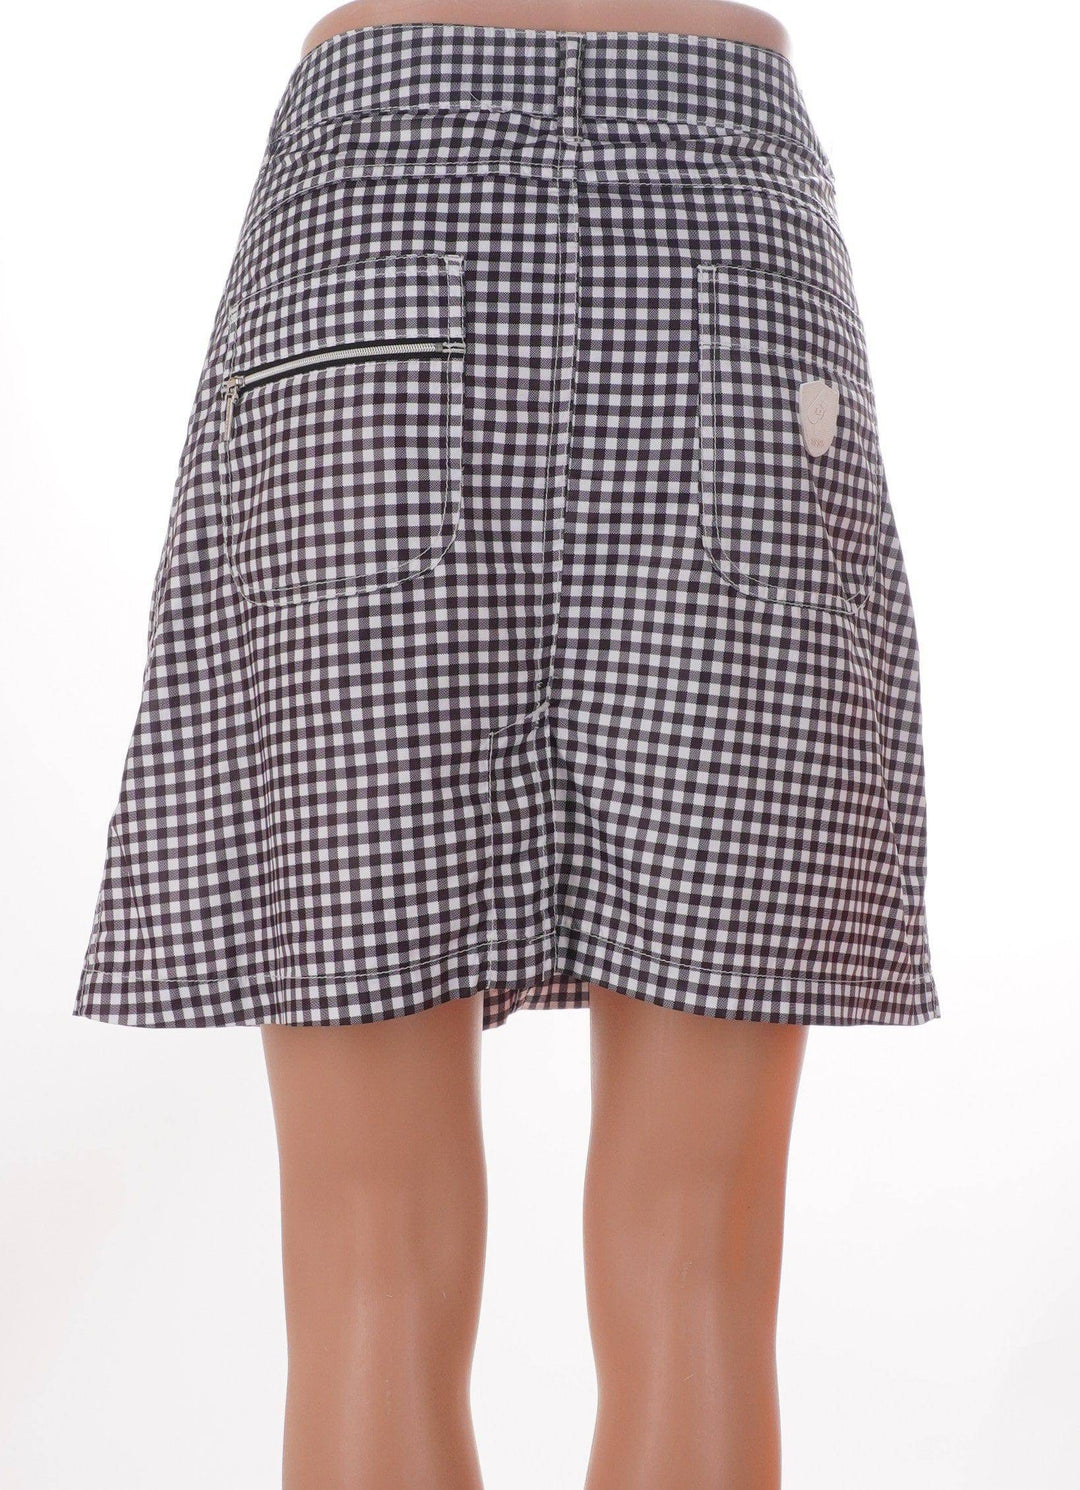 Tommy Bahama Navy Blue / Extra Large / Consigned Daily Sports Skort - White/Brown Checkered - Size 6